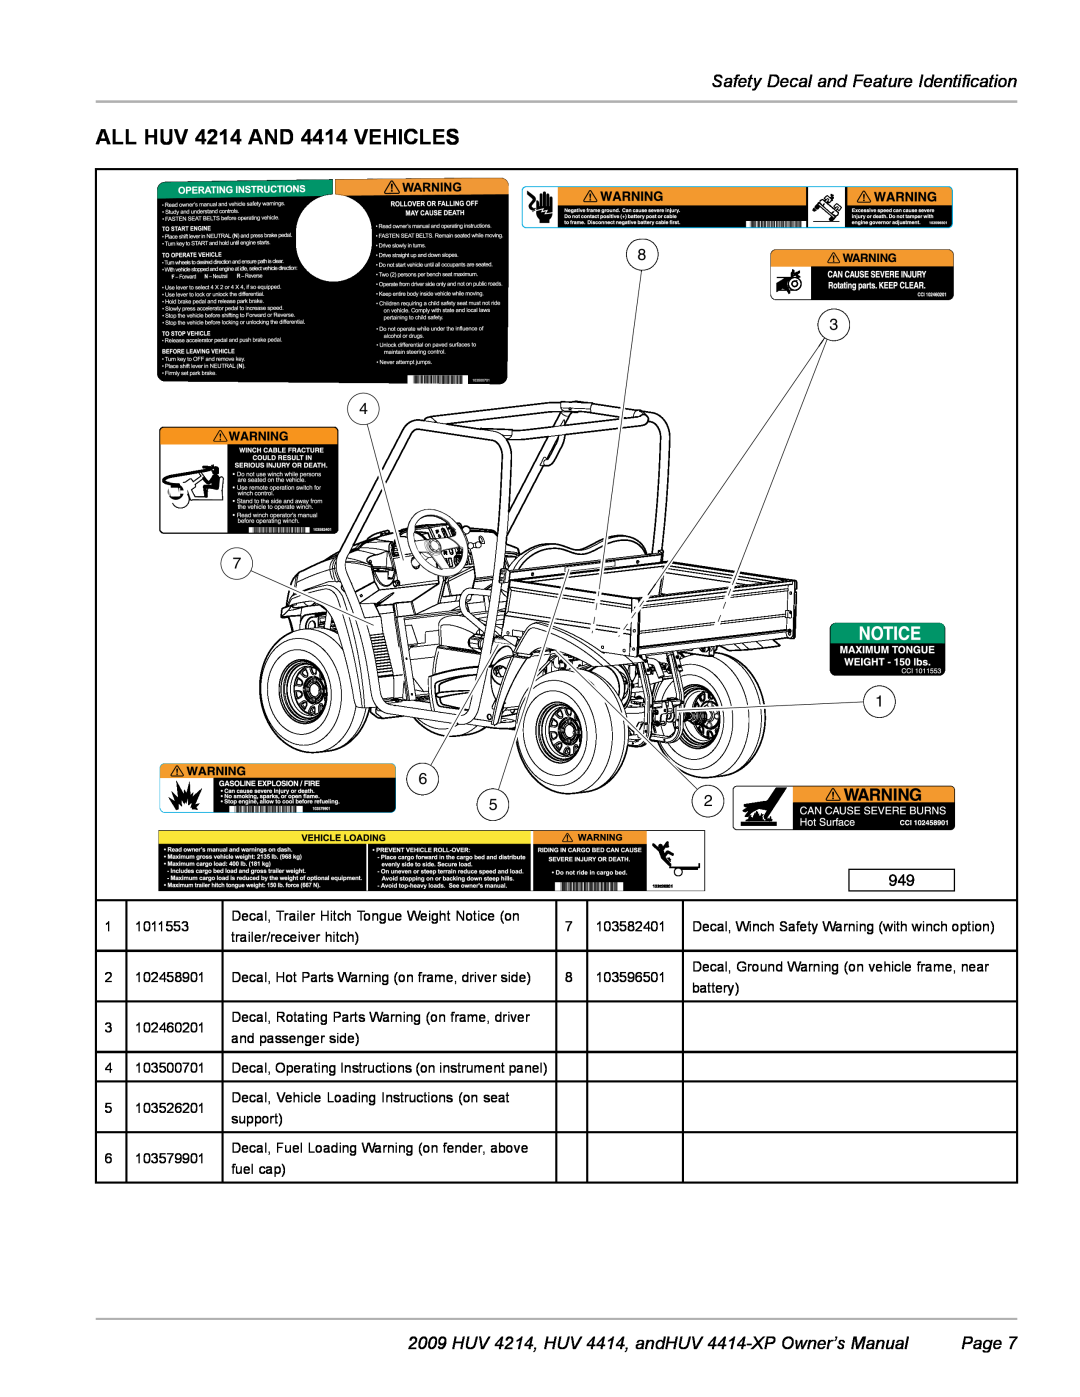 Husqvarna HUV 4414-XP ALL HUV 4214 AND 4414 VEHICLES, Safety Decal and Feature Identification, Page, 1011553 